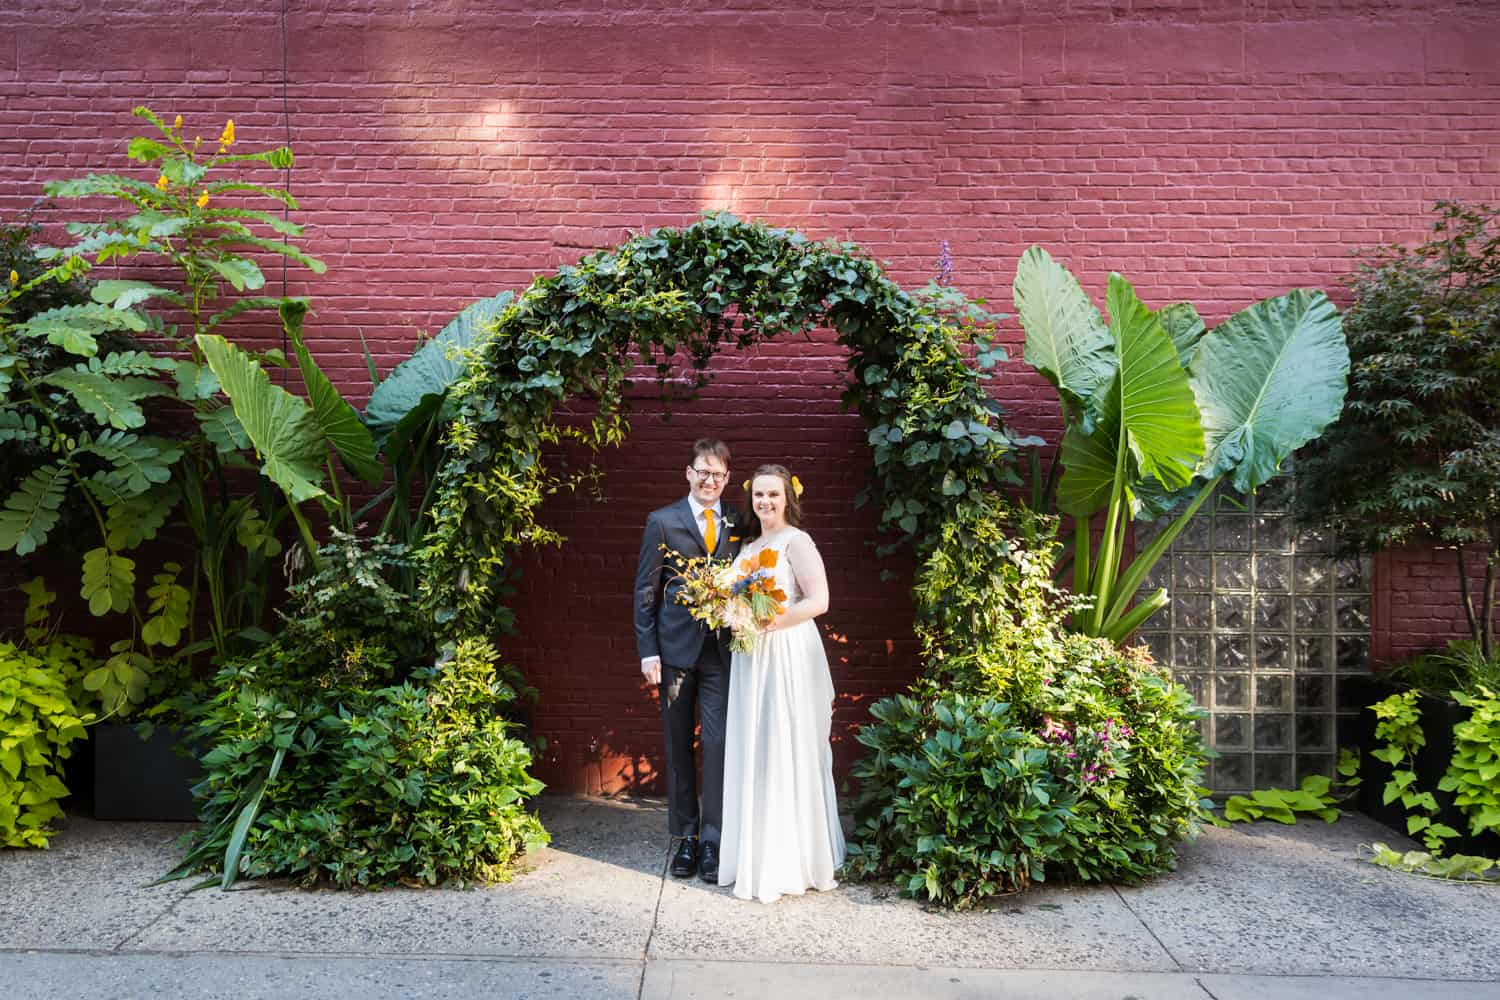 Bride and groom under arch of plants on NYC sidewalk